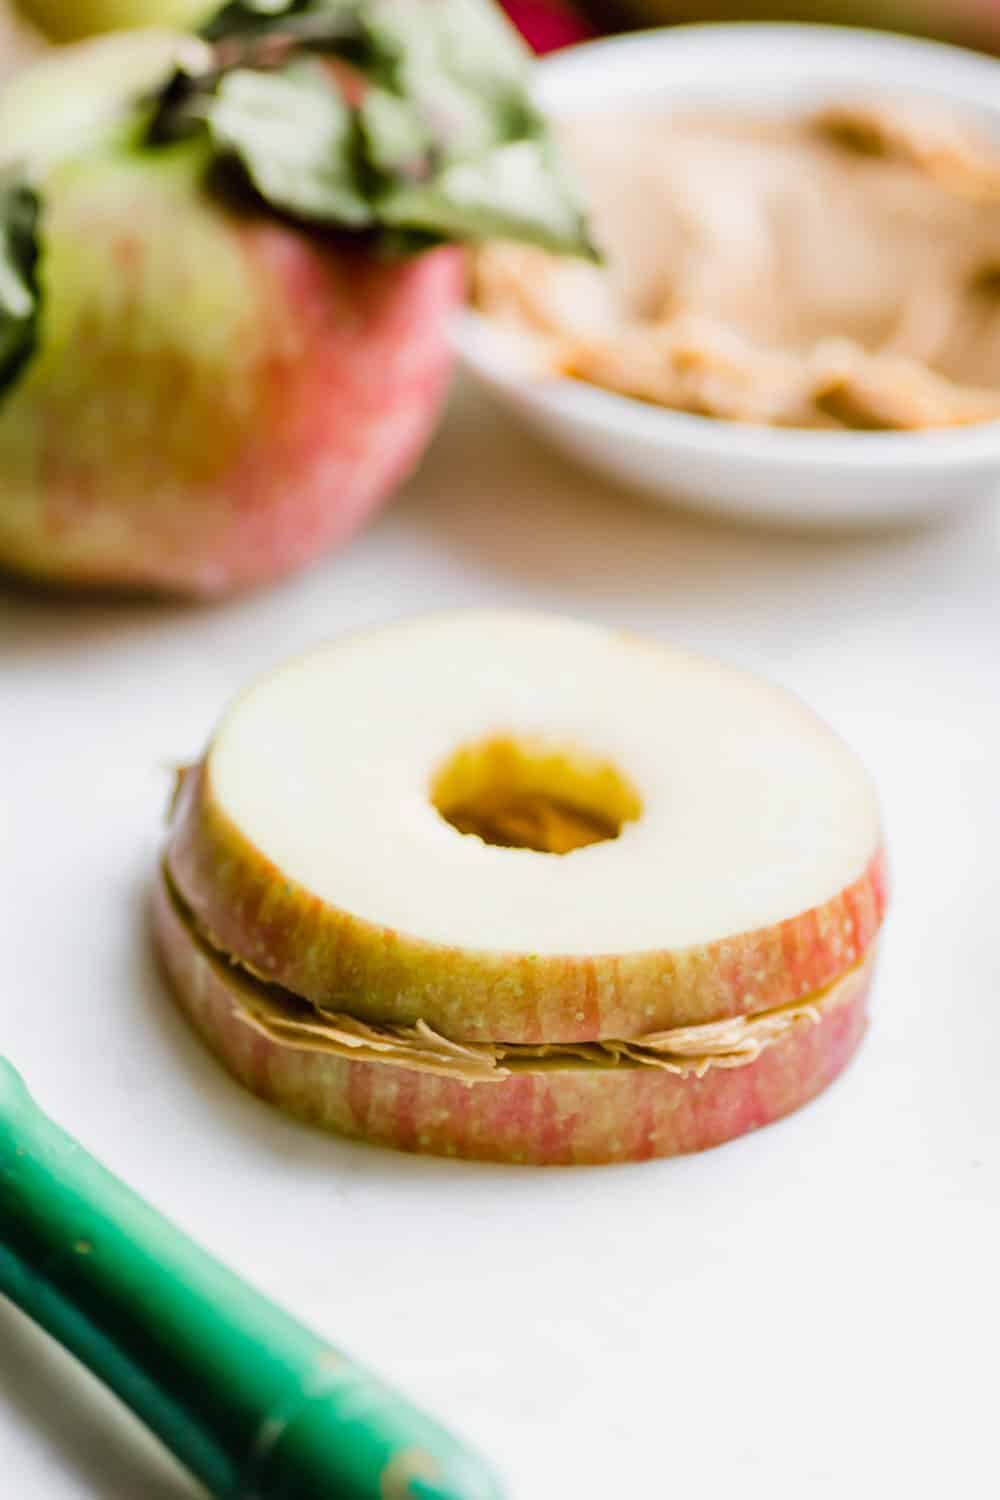 Make this apple and peanut butter sandwich as an easy and healthy snack. Naturally gluten-free and vegan, this can also be made nut-free. Whip this together in under 5 minutes for a snack the whole family will love. || The Butter Half #easysnacks #easysnackidea #healthysnacks #glutenfreesnacks #vegansnacks #quicksnacks #thebutterhalf